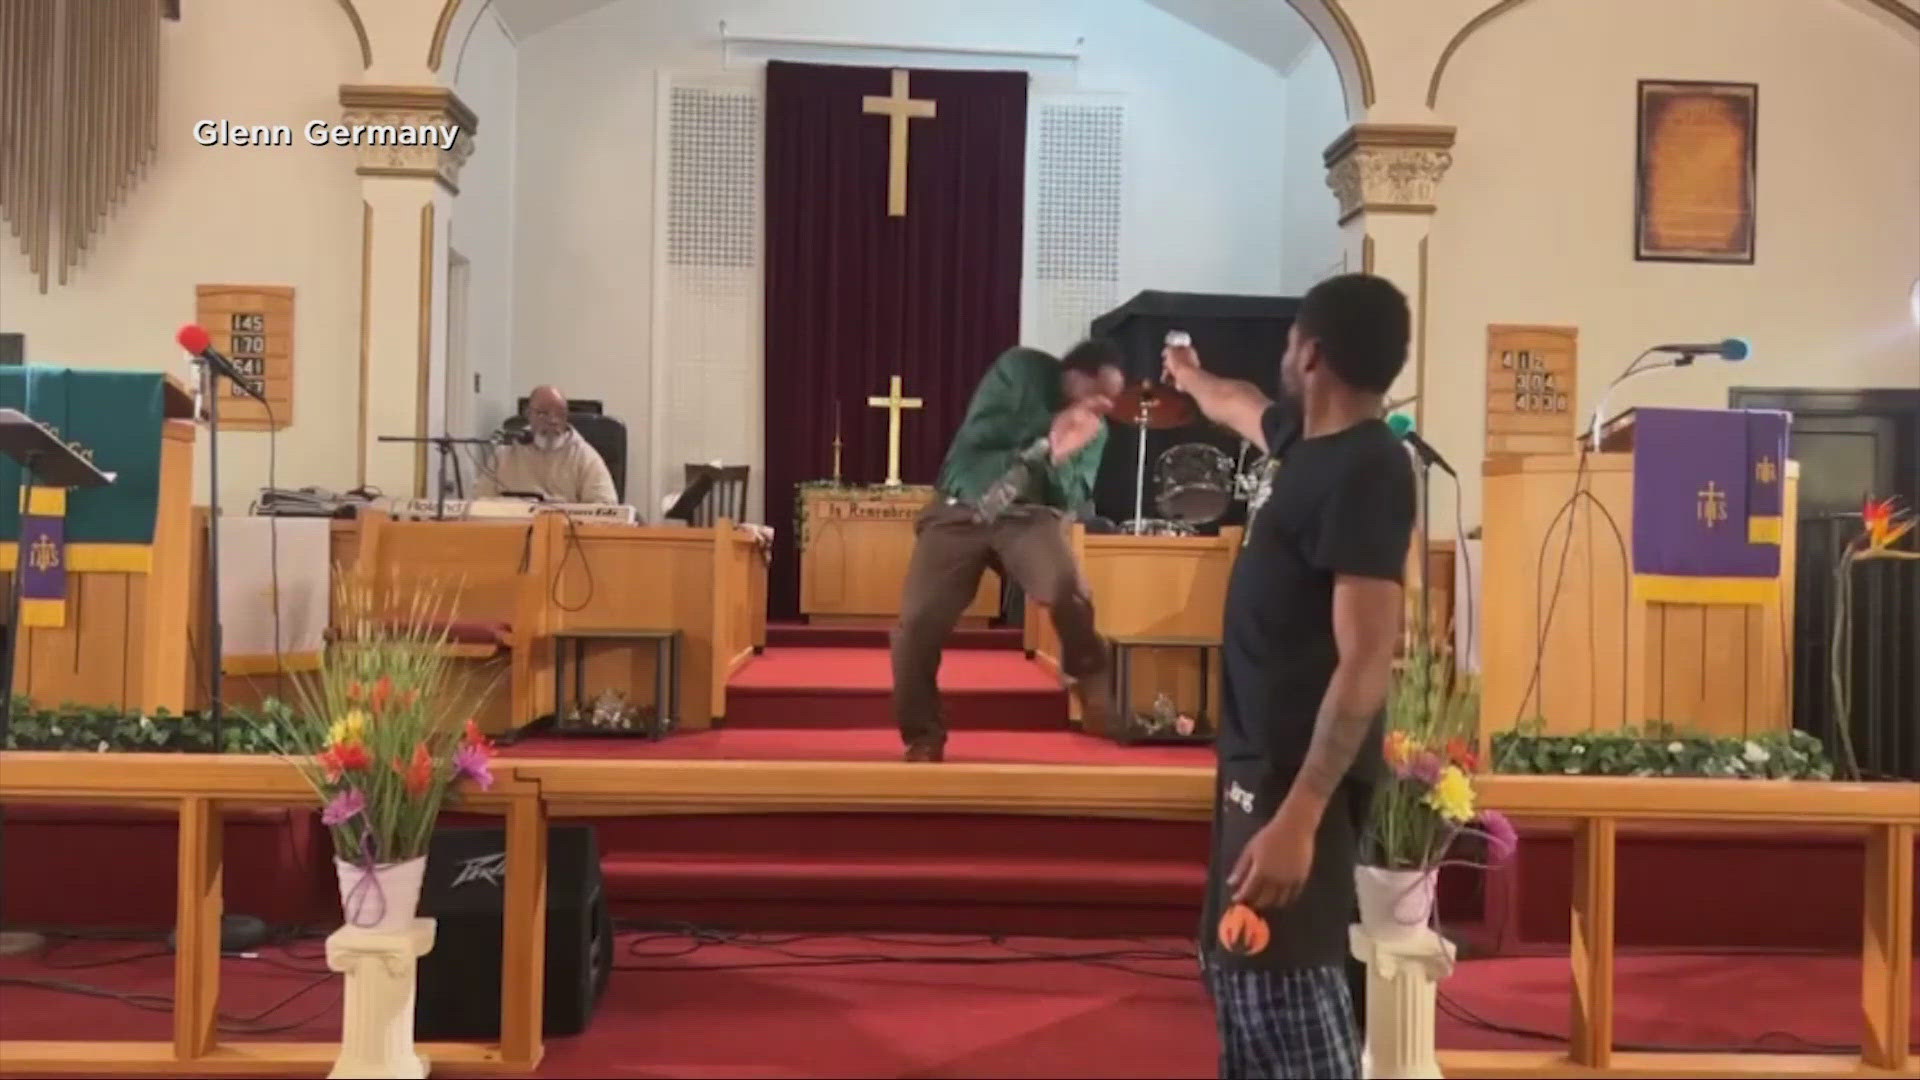 Authorities say a man who tried to shoot a pastor during a service at a Pennsylvania church because “God told him to do it” was thwarted when his gun didn’t fire.